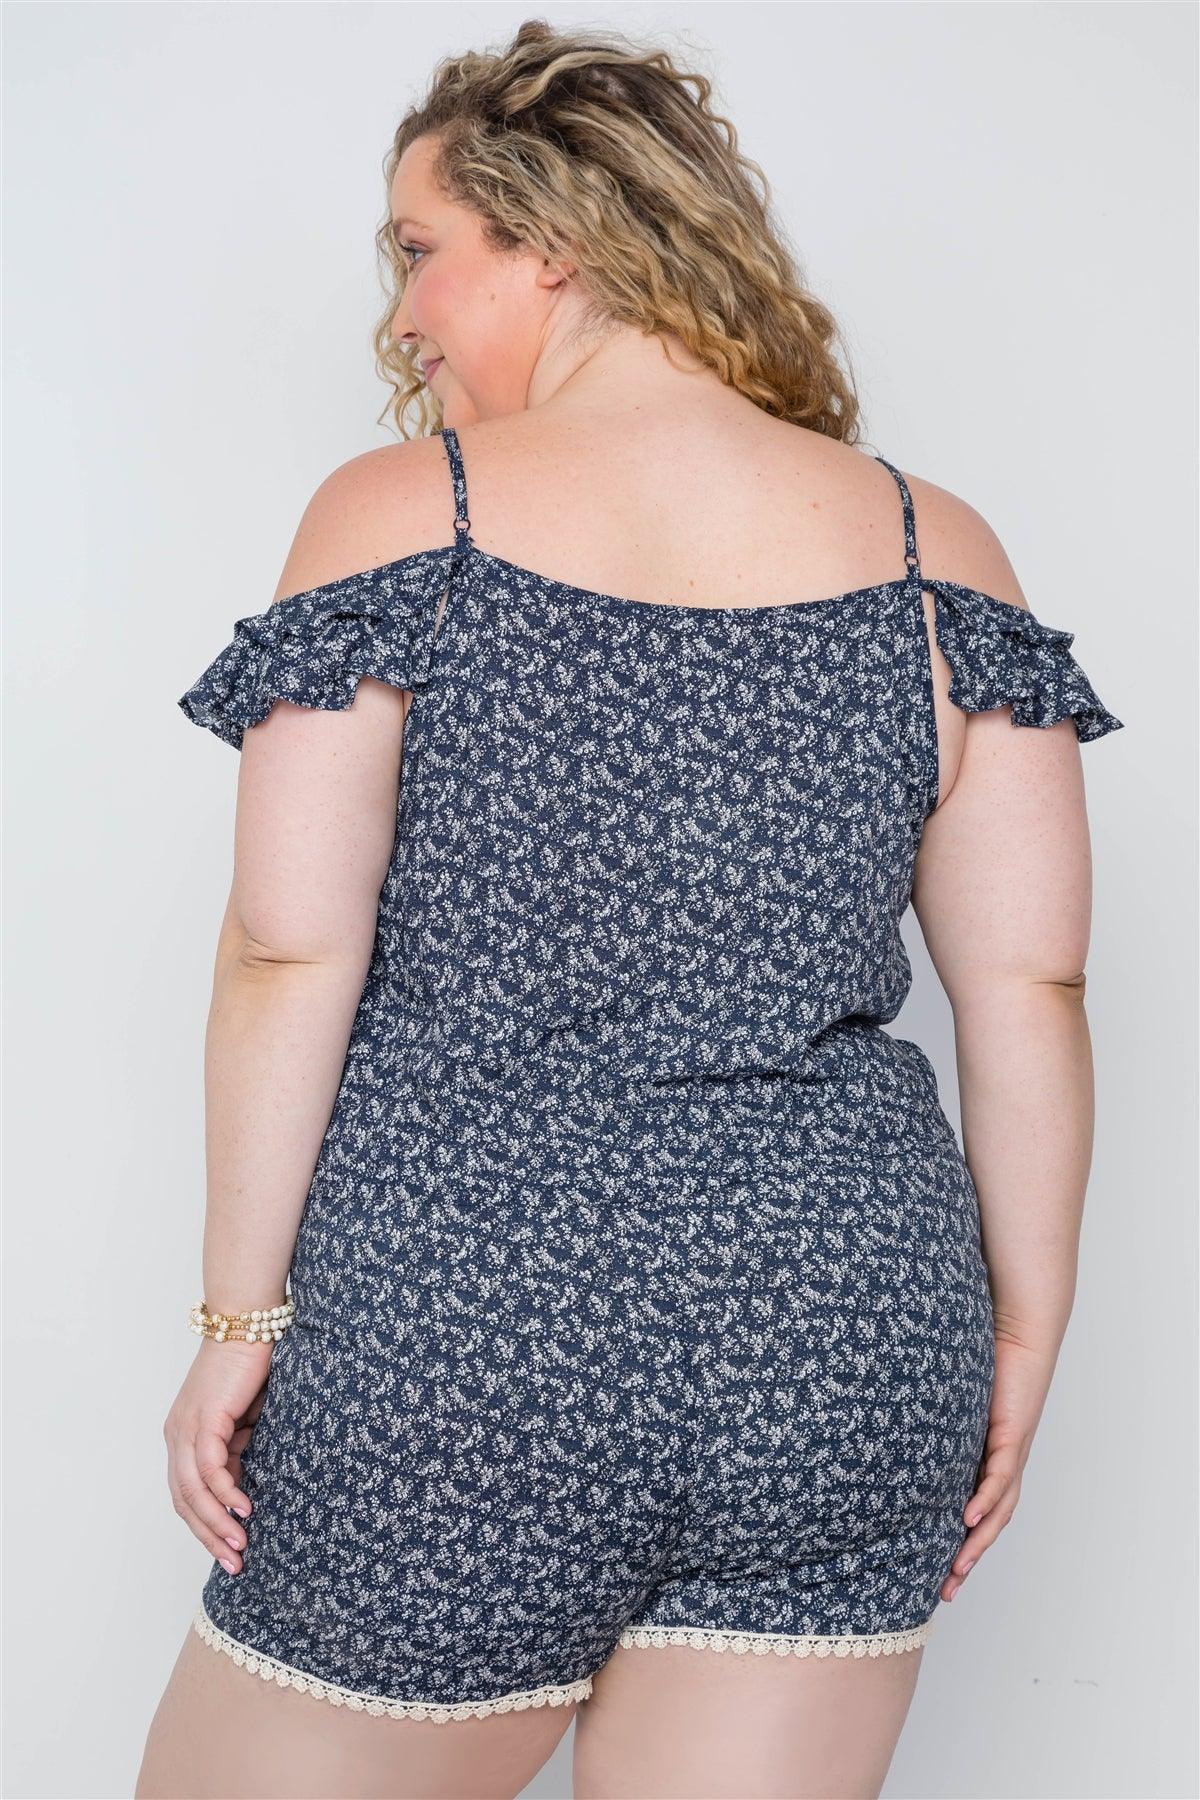 Plus Size Navy Floral Print Lace Up Romper - AMIClubwear